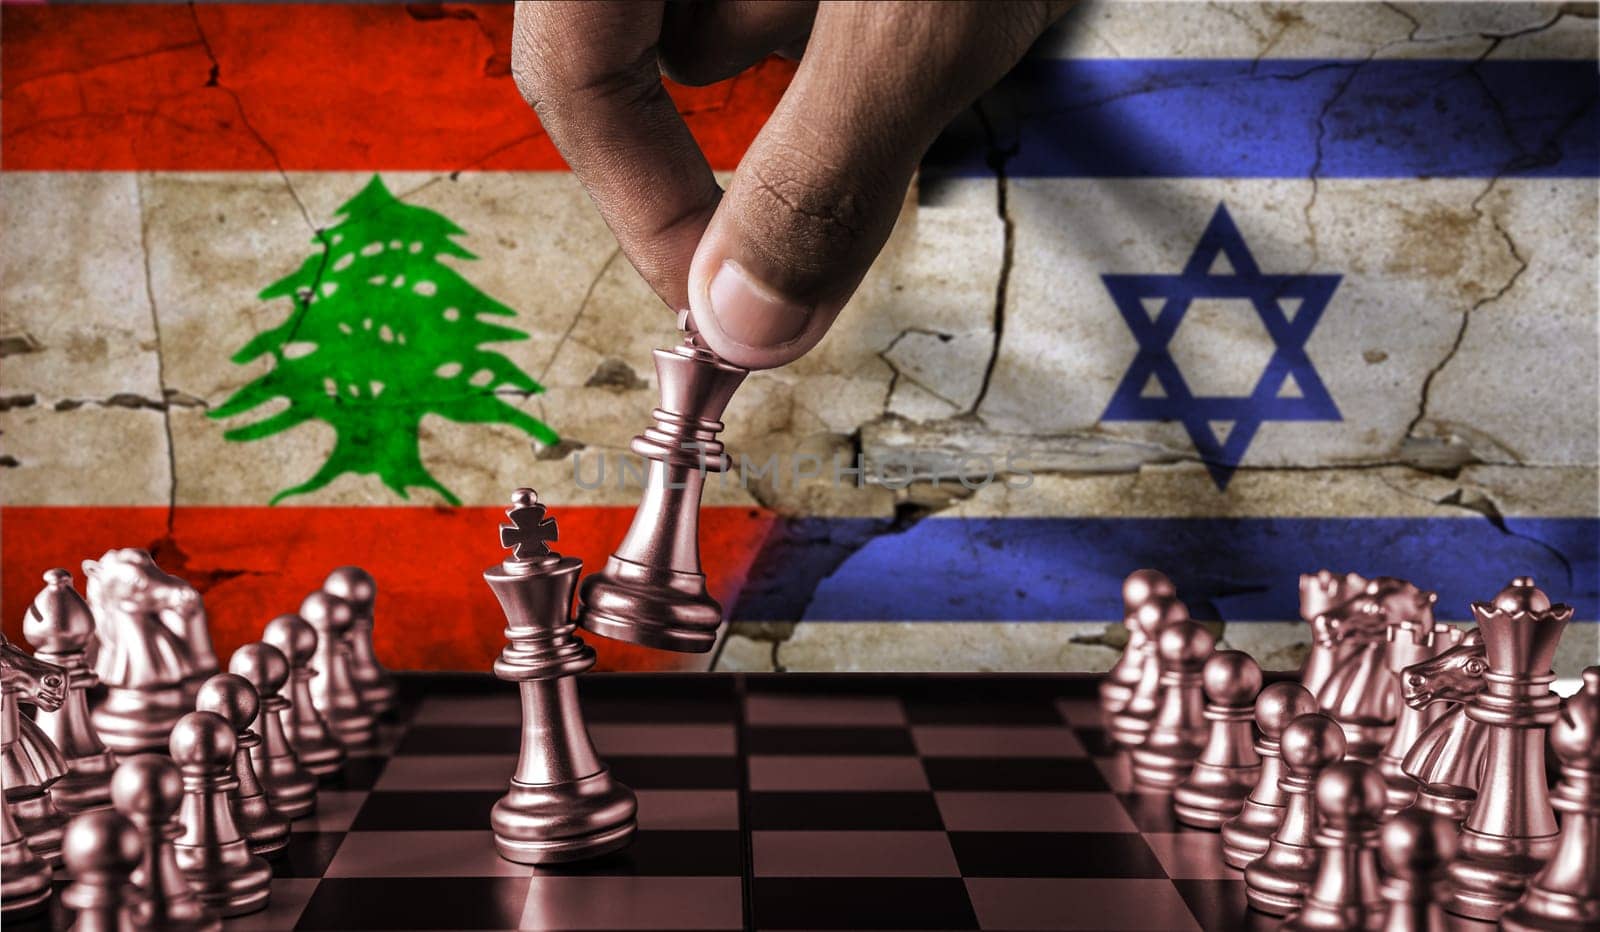 Israel vs Lebanon flag concept on chessboard. Political tension between Lebanon and Israel. Conflict between Lebanon and Israel on pieces of chessboard by isaiphoto